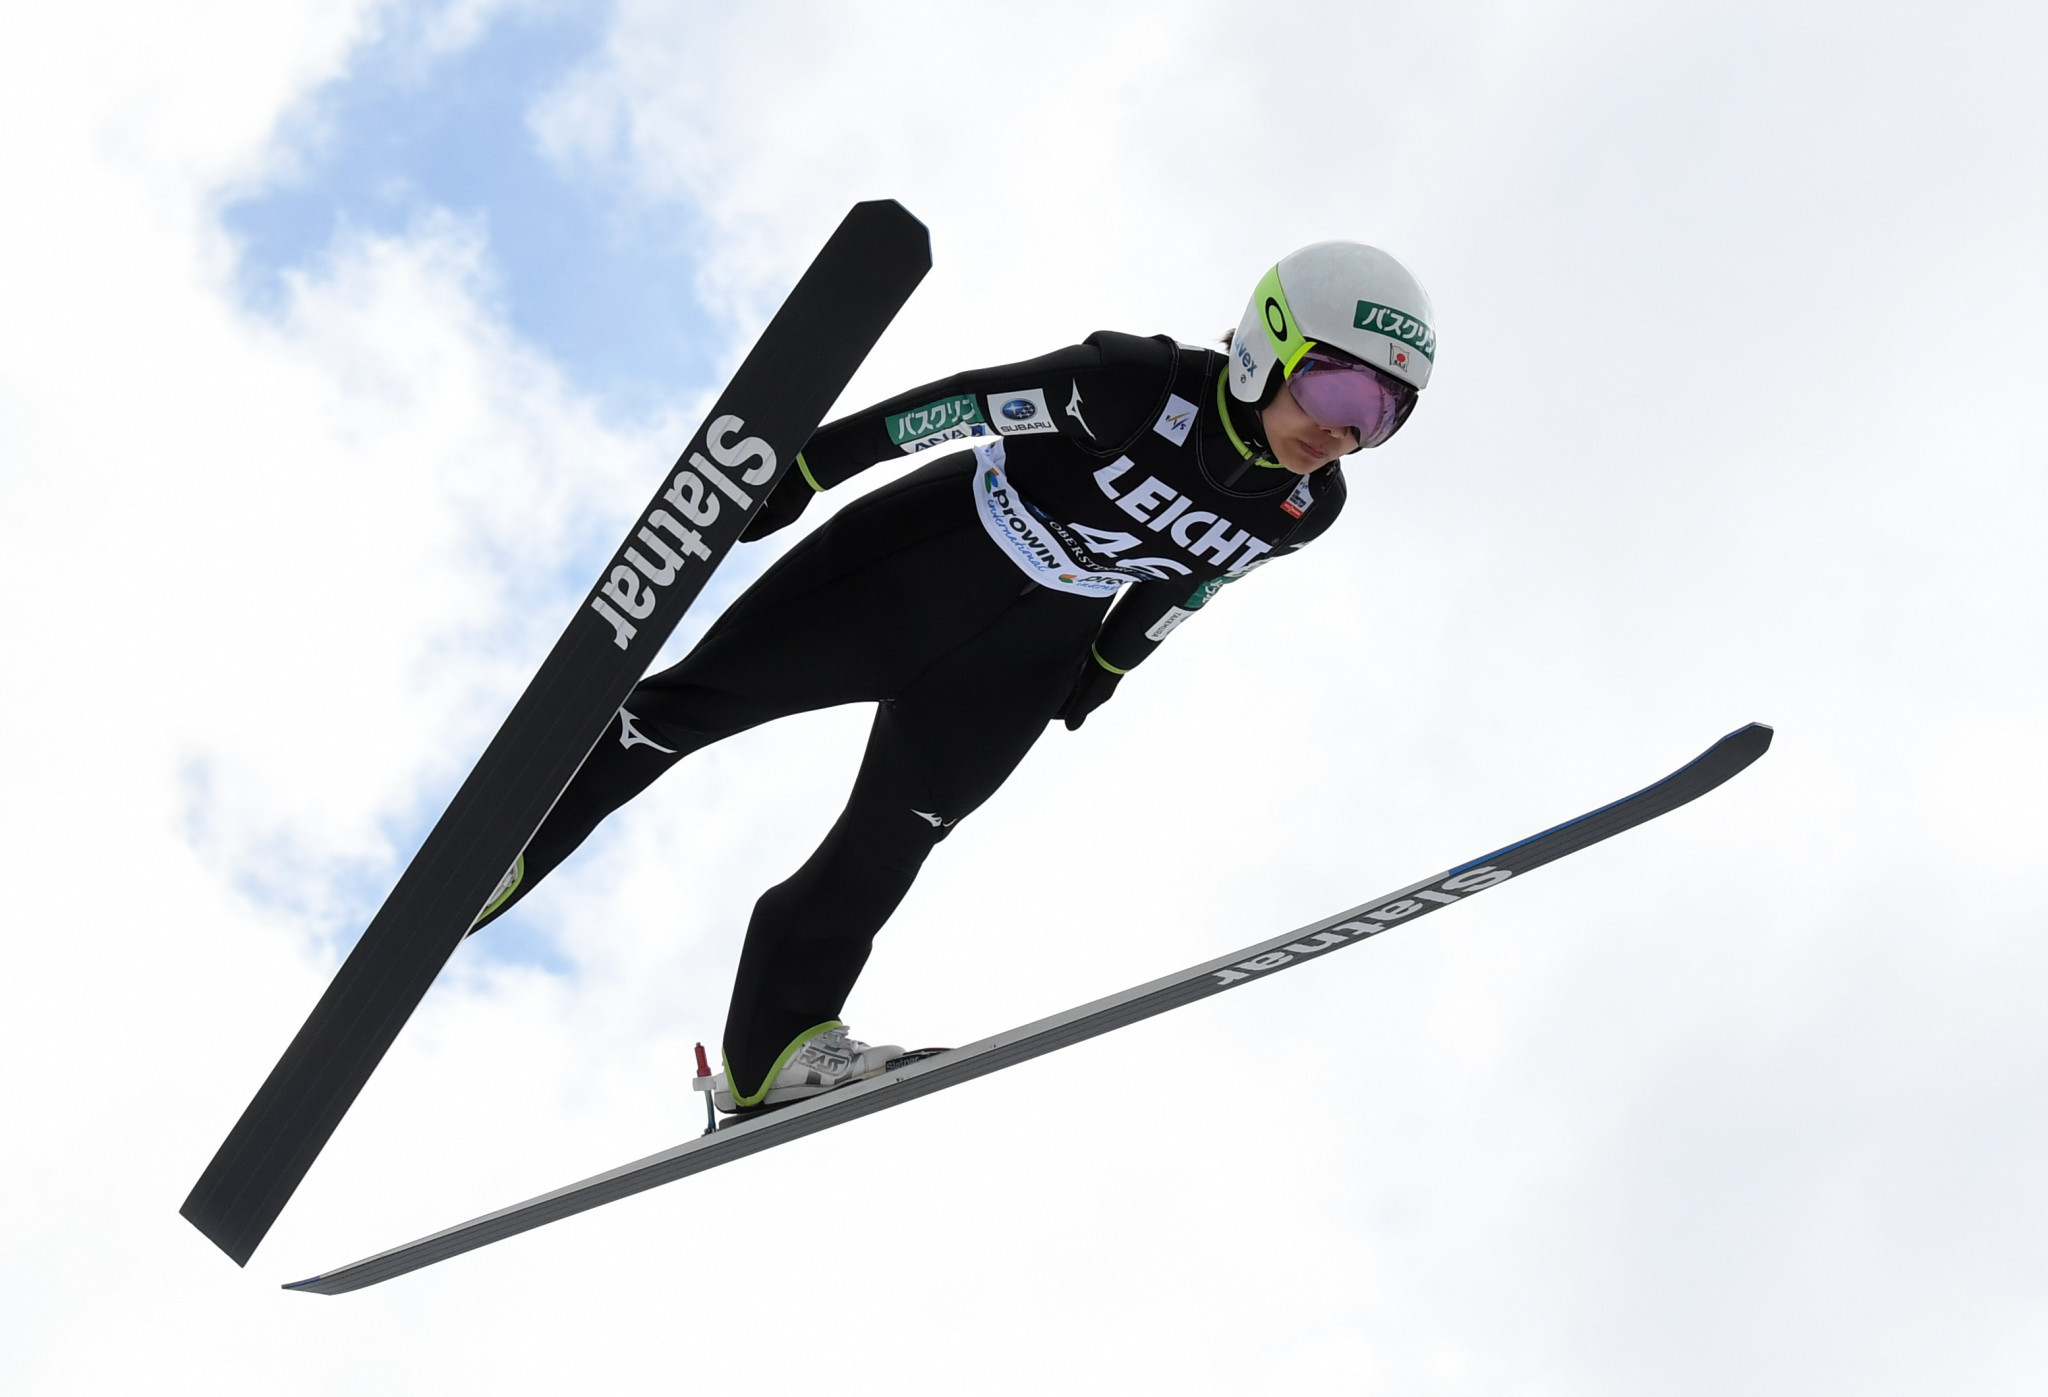 Japan's Takanashi tops individual normal hill qualification standings at women's FIS Ski Jumping World Cup in Lillehammer